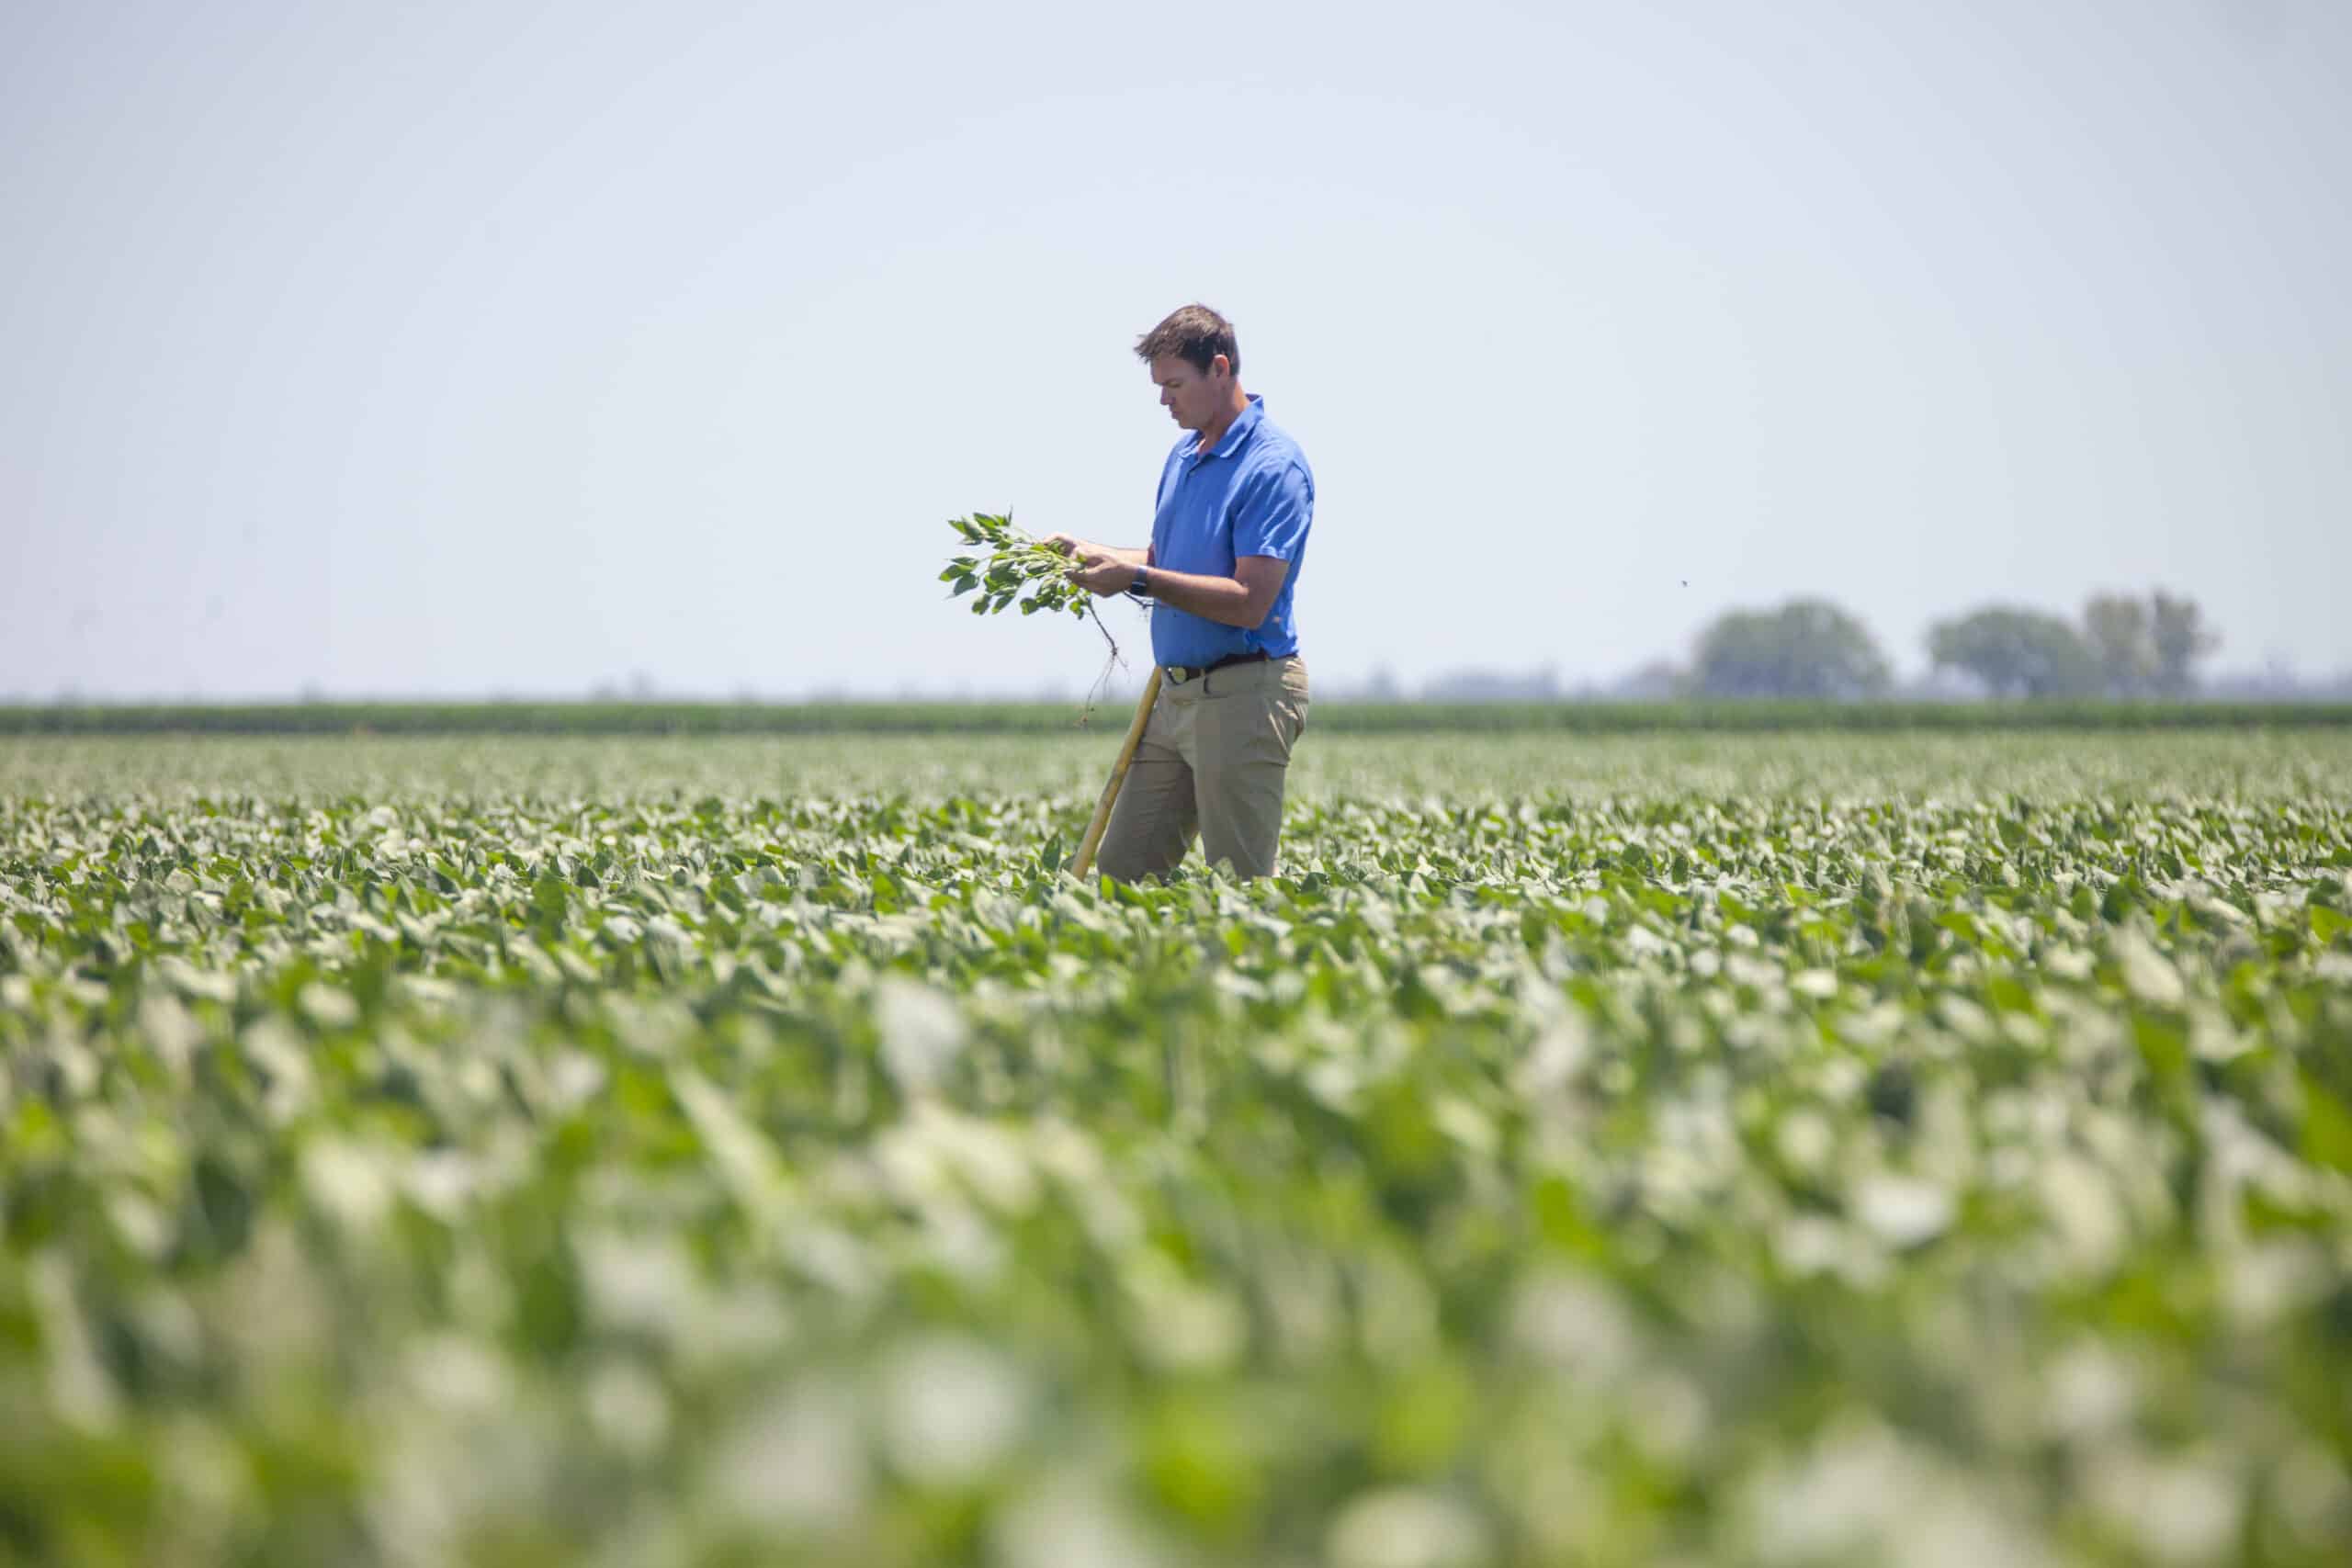 Man stands in a soybean field inspecting a pulled soybean plant that he holds in his hands.